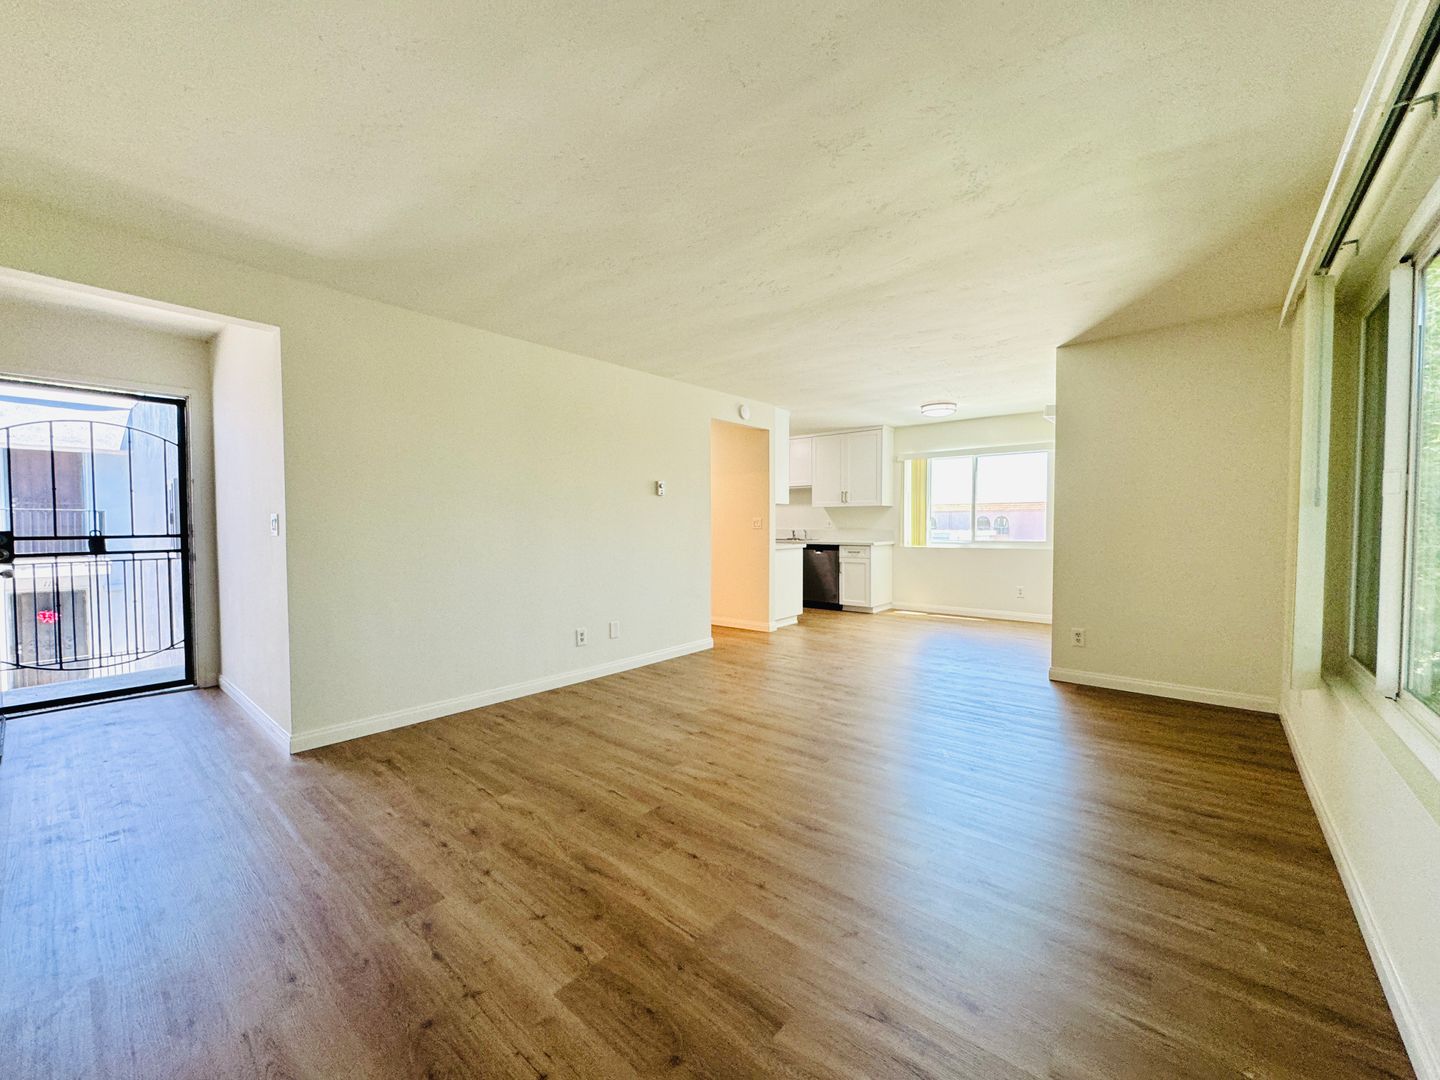 Newly Renovated Pacific Beach Condo 2BD/1BA Available Now!